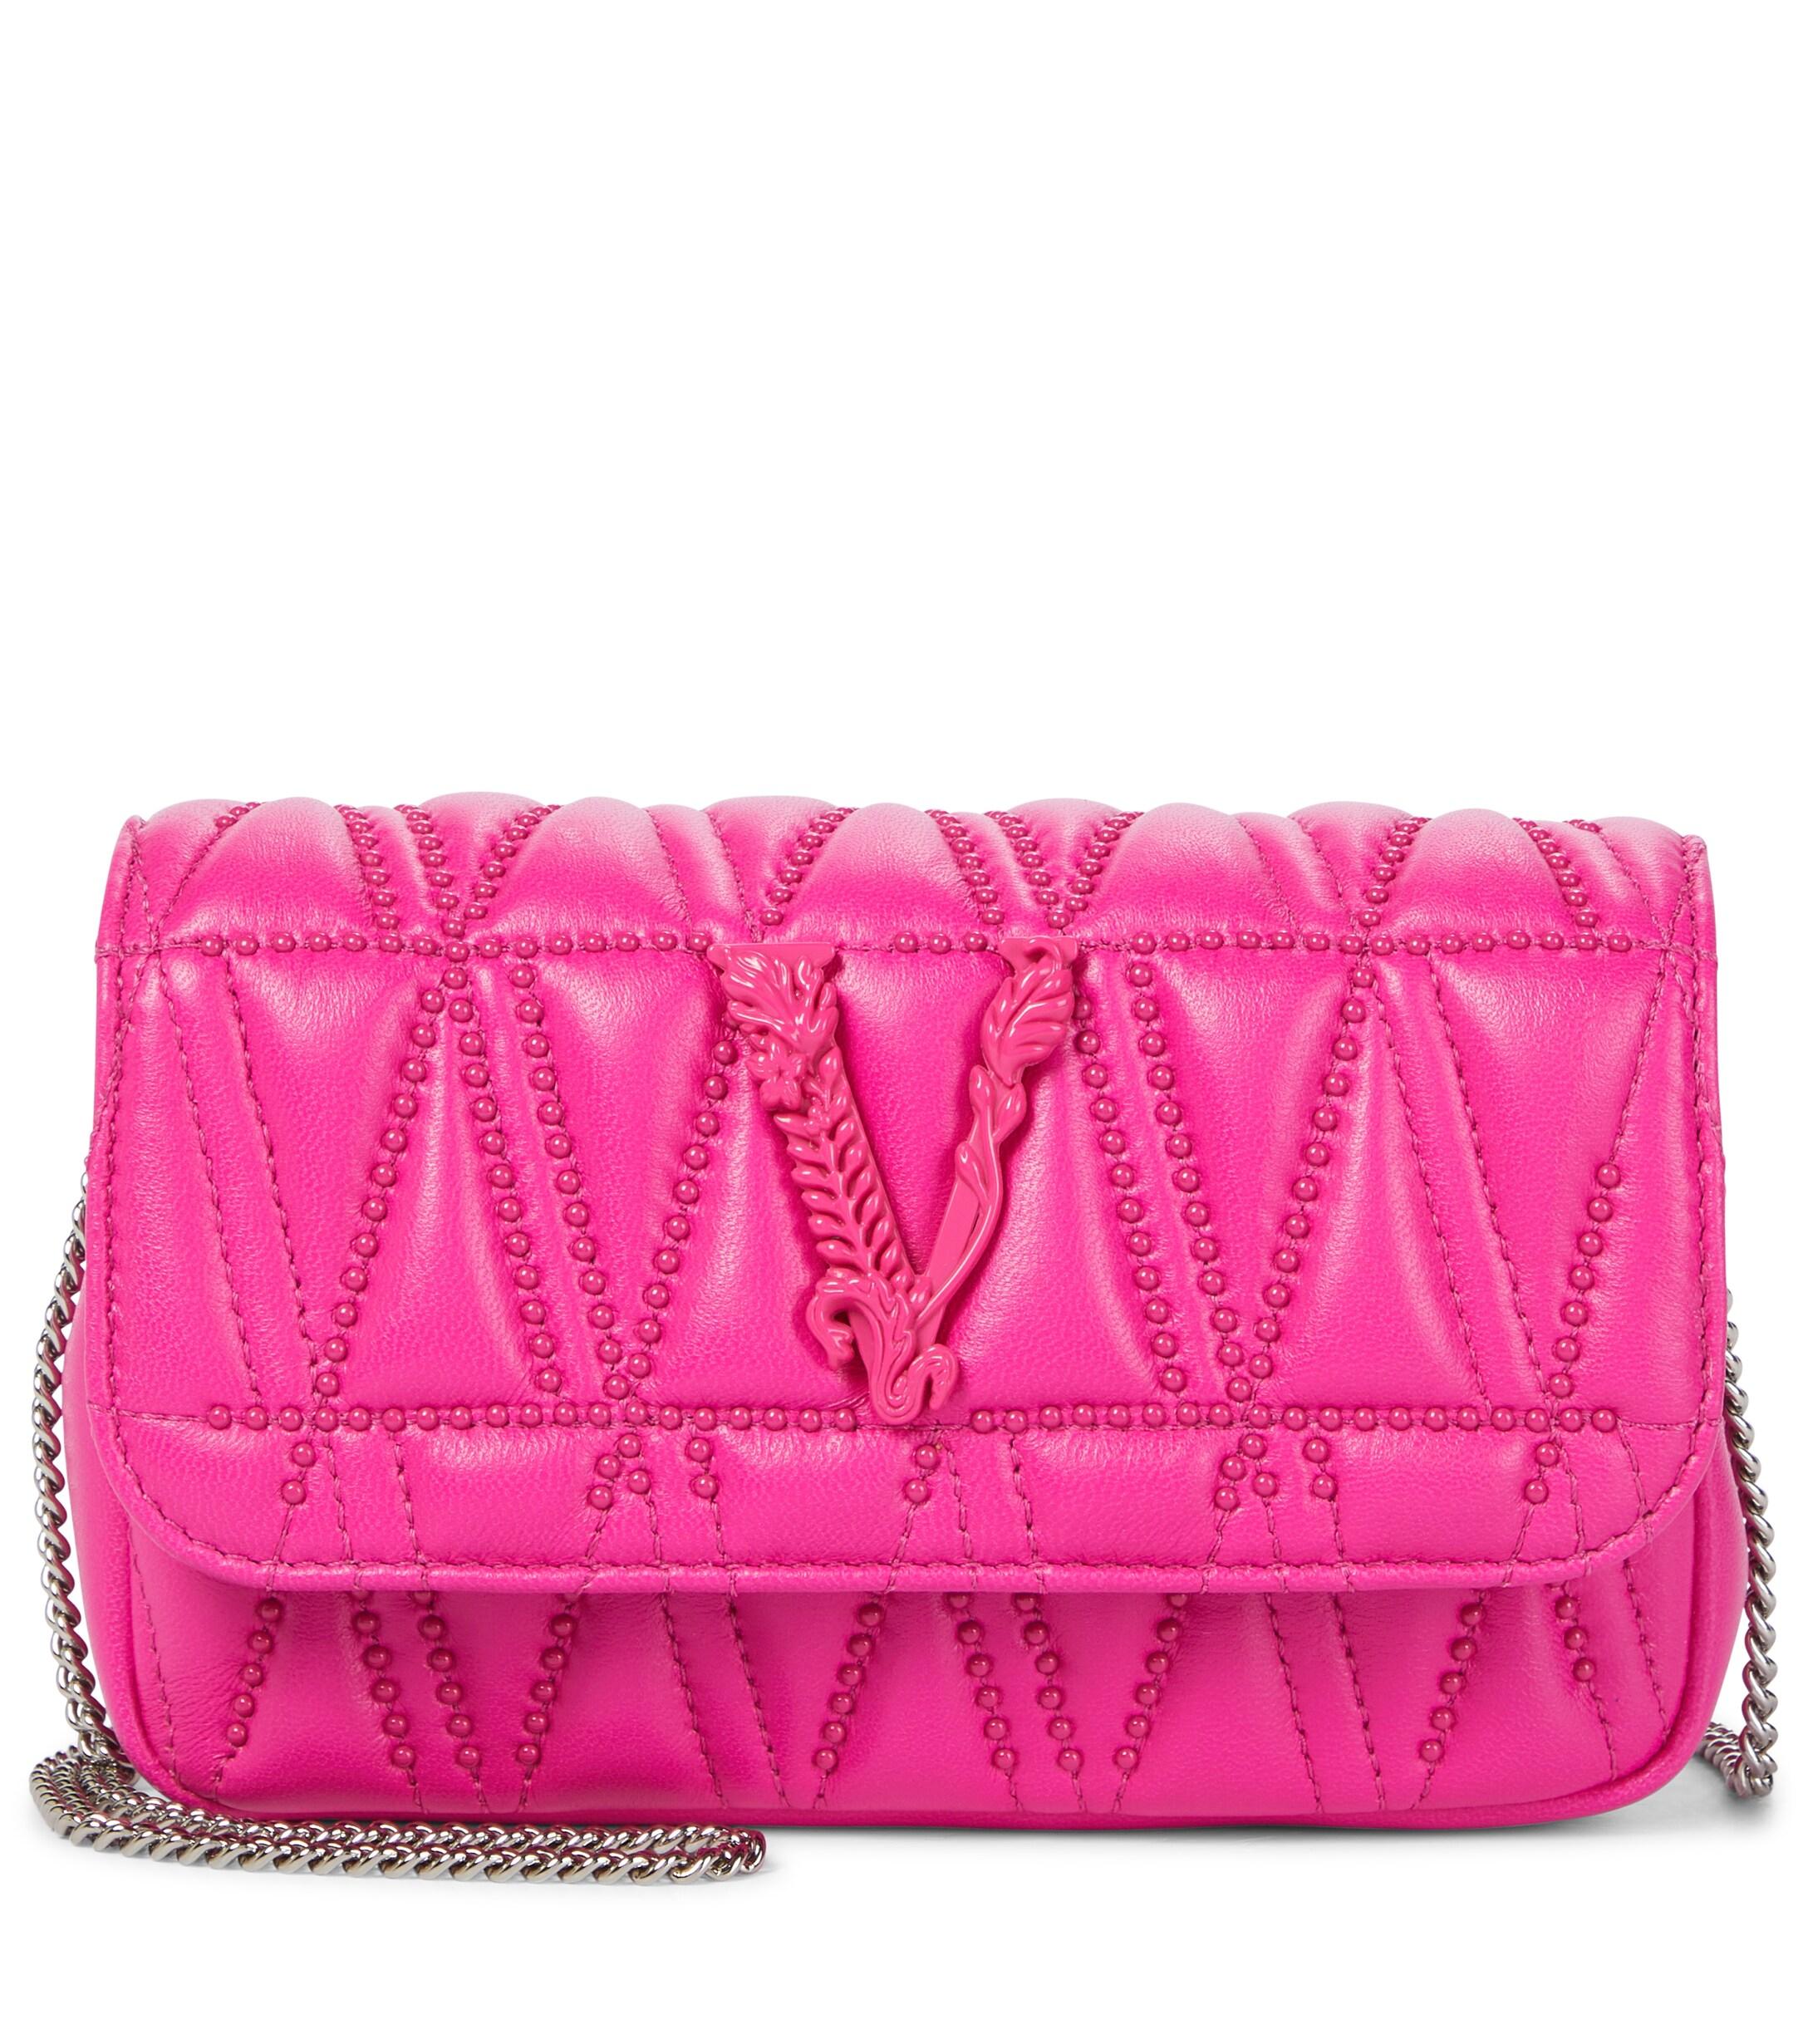 Versace Virtus Small Embellished Leather Crossbody Bag in Pink | Lyst